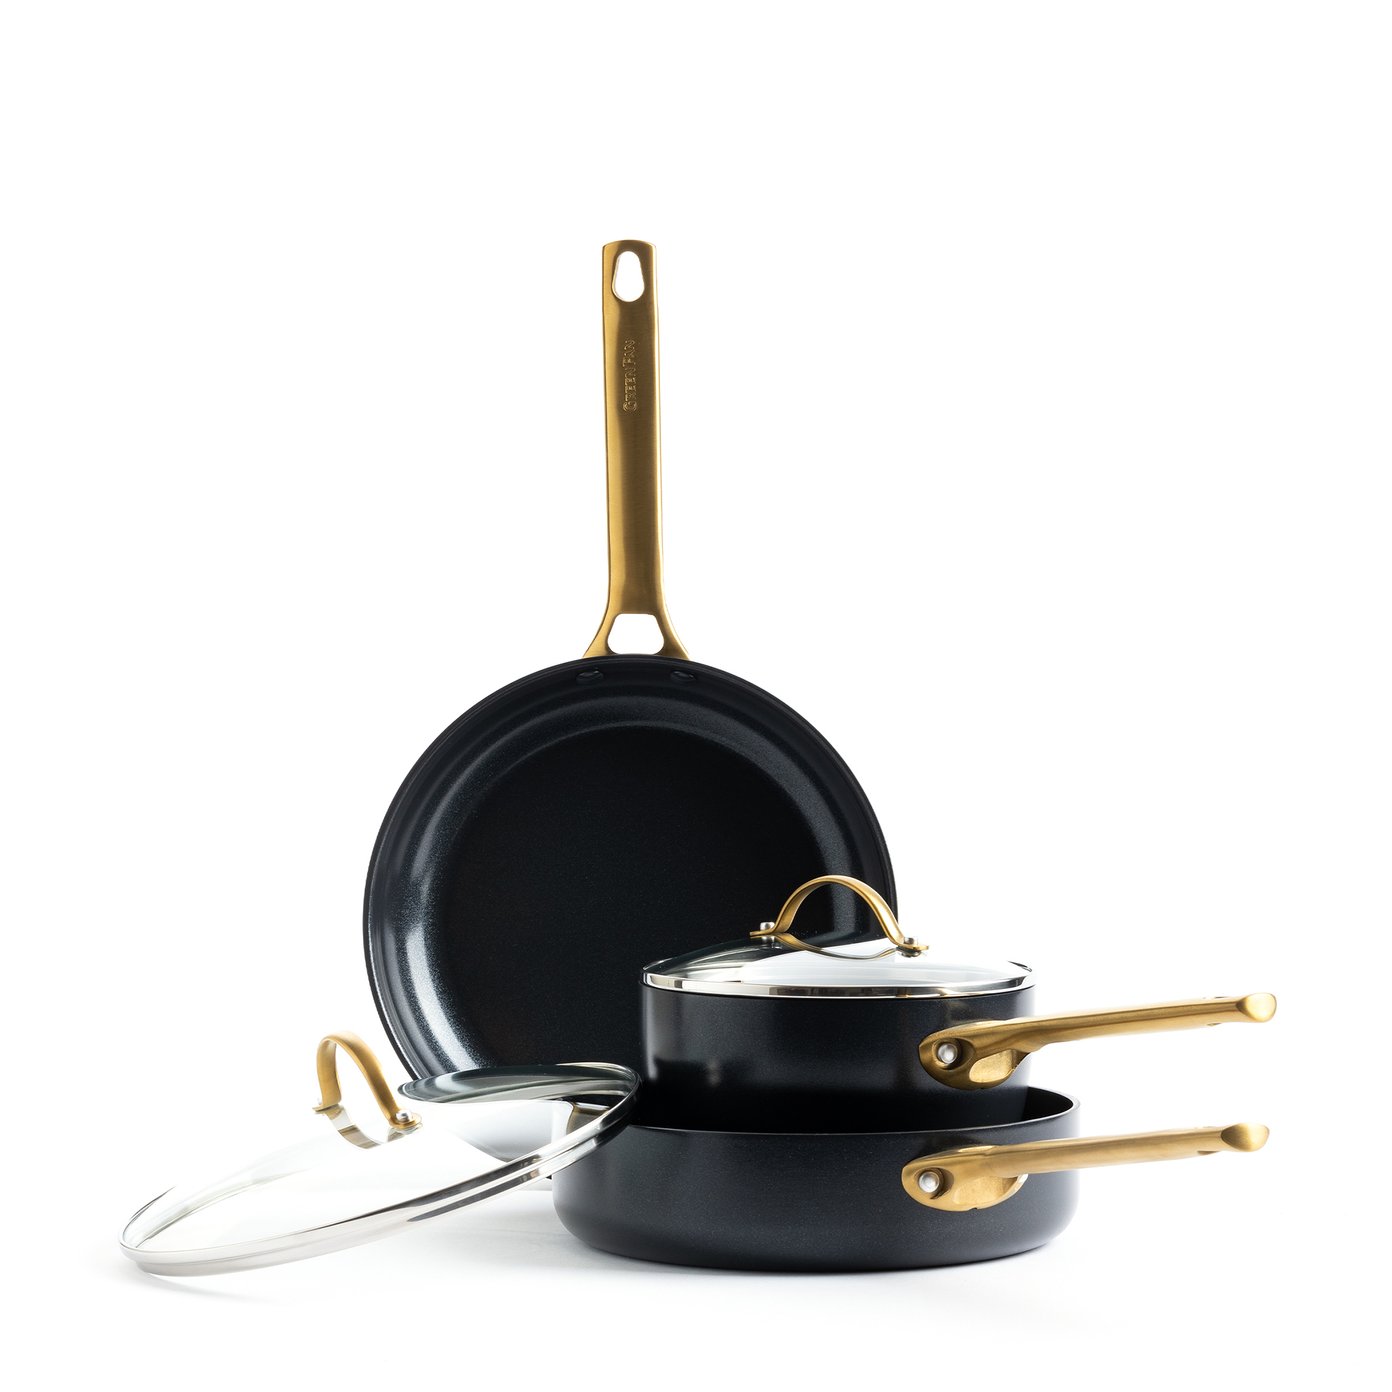 The Cookware Company GreenPan Reserve Nonstick 5-Piece Cookware